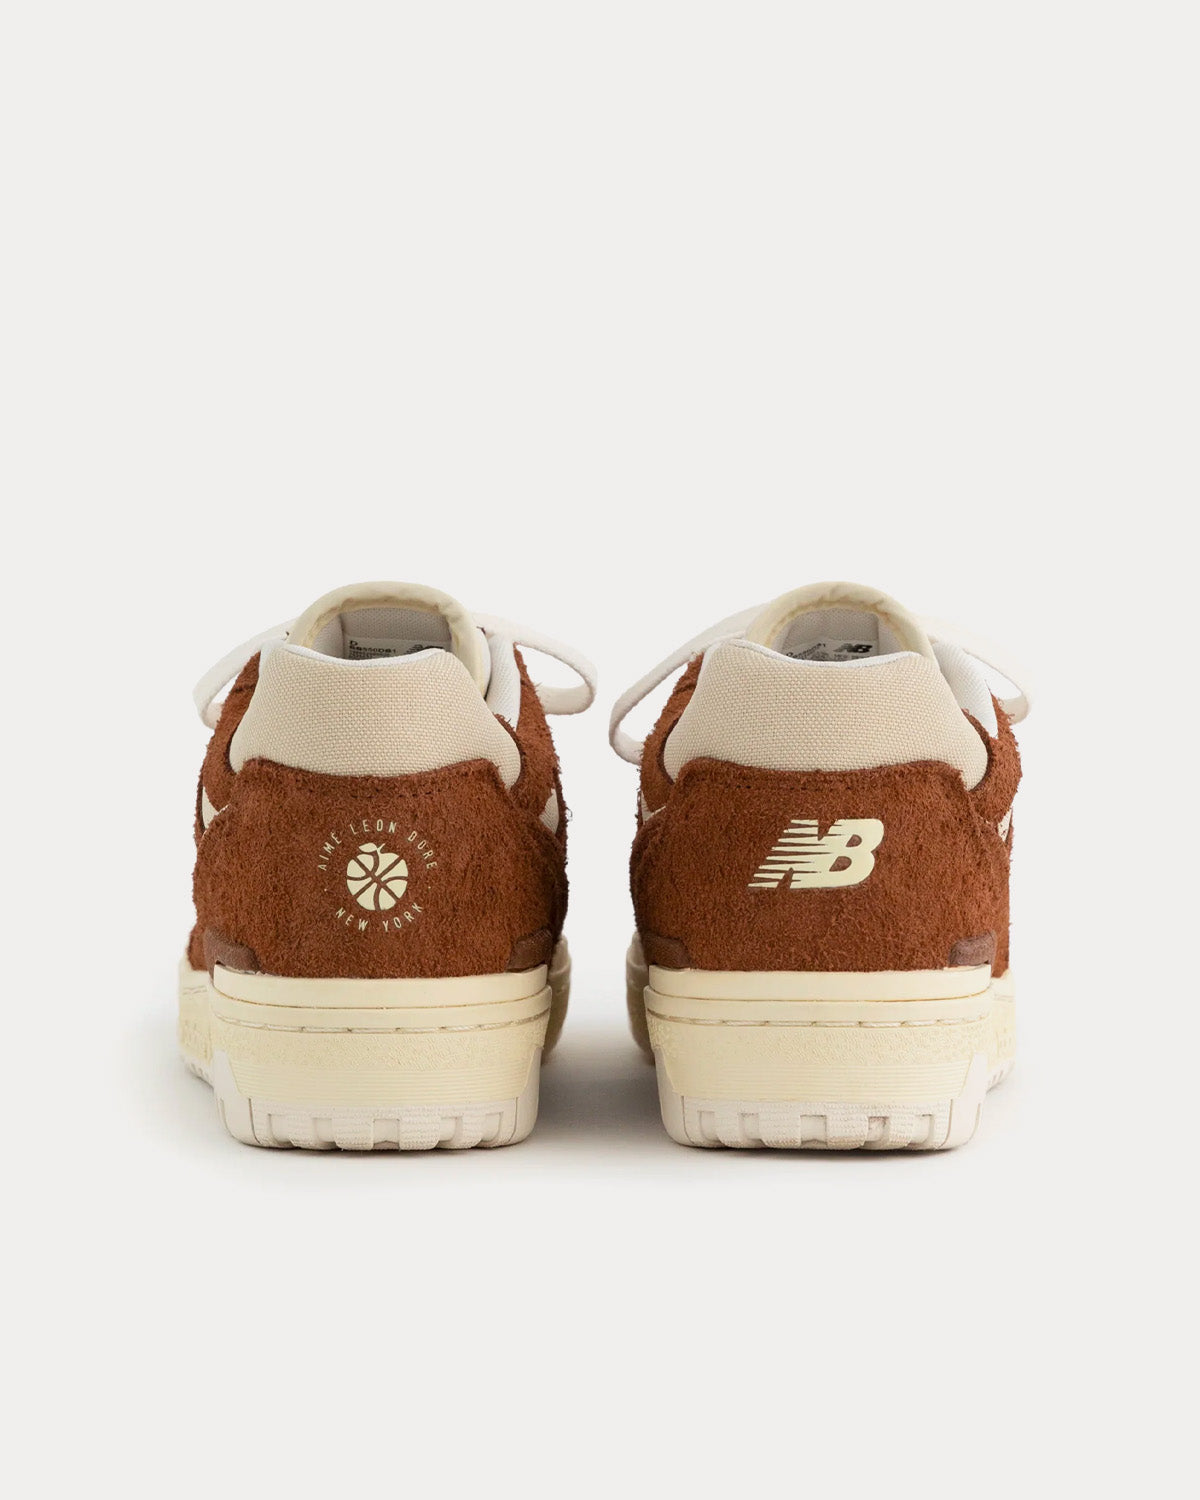 New Balance x Aime Leon Dore - P550 Basketball Oxfords Brown Low Top Sneakers